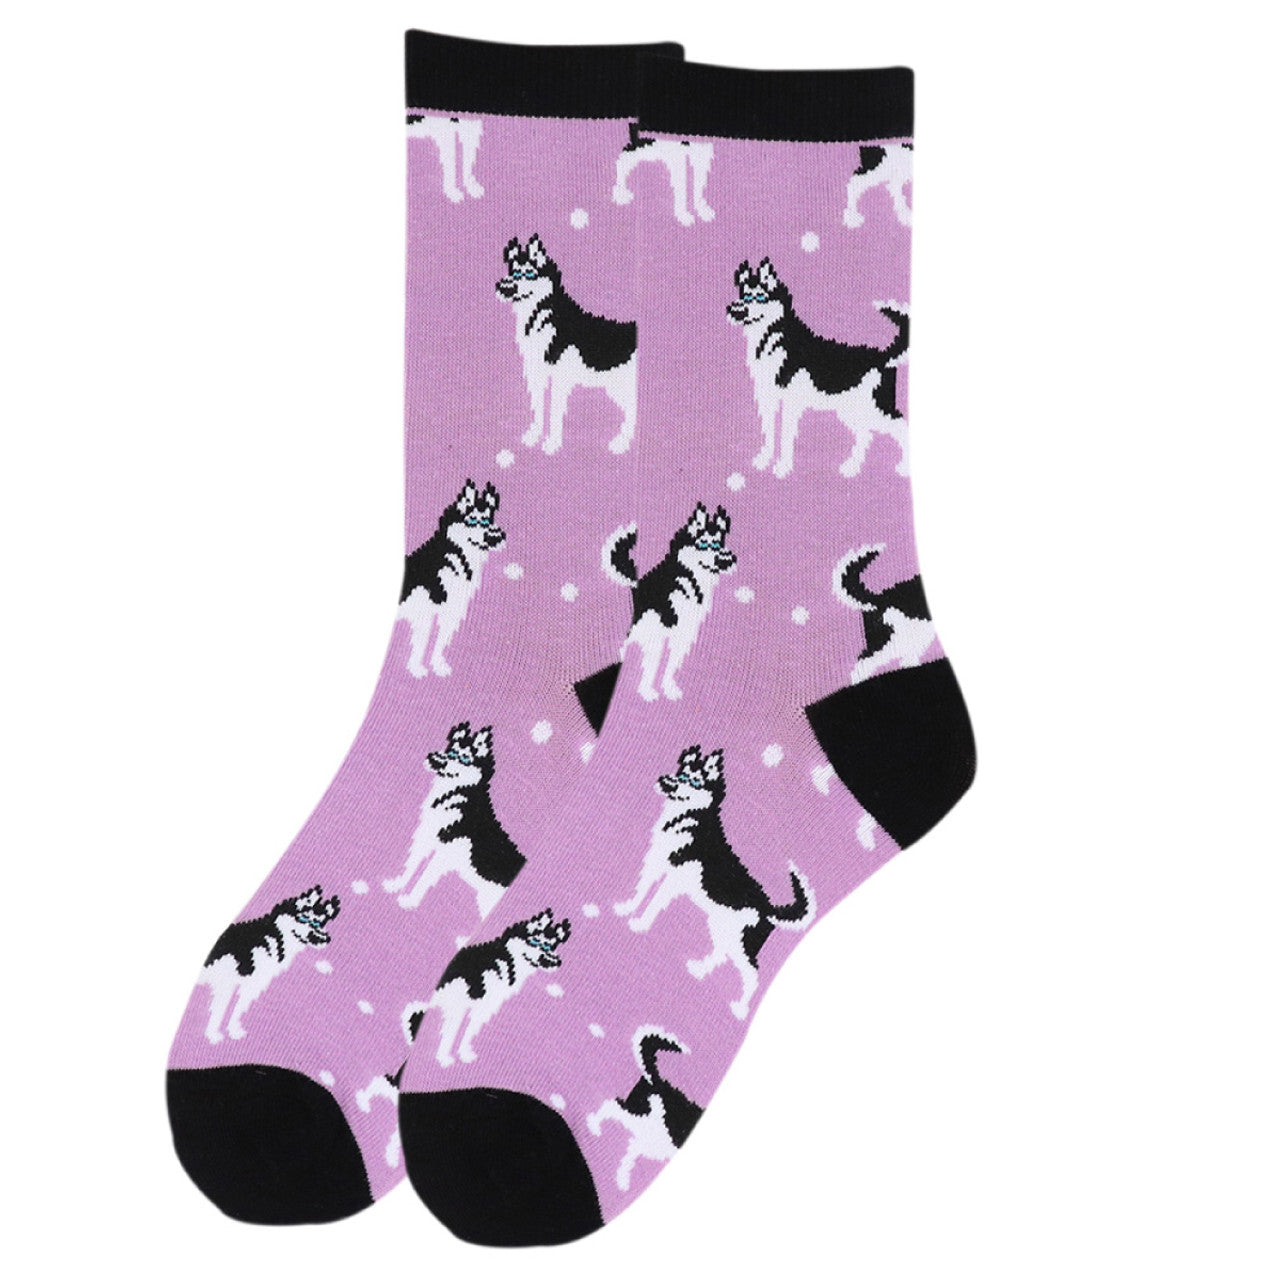 A pair of women's crew socks in a soft lilac color, patterned with black and white Siberian Husky illustrations in various poses, accented with small white dots that suggest a snowy scene. The toe, heel, and cuff of the socks are solid black, providing a contrast to the light purple background.